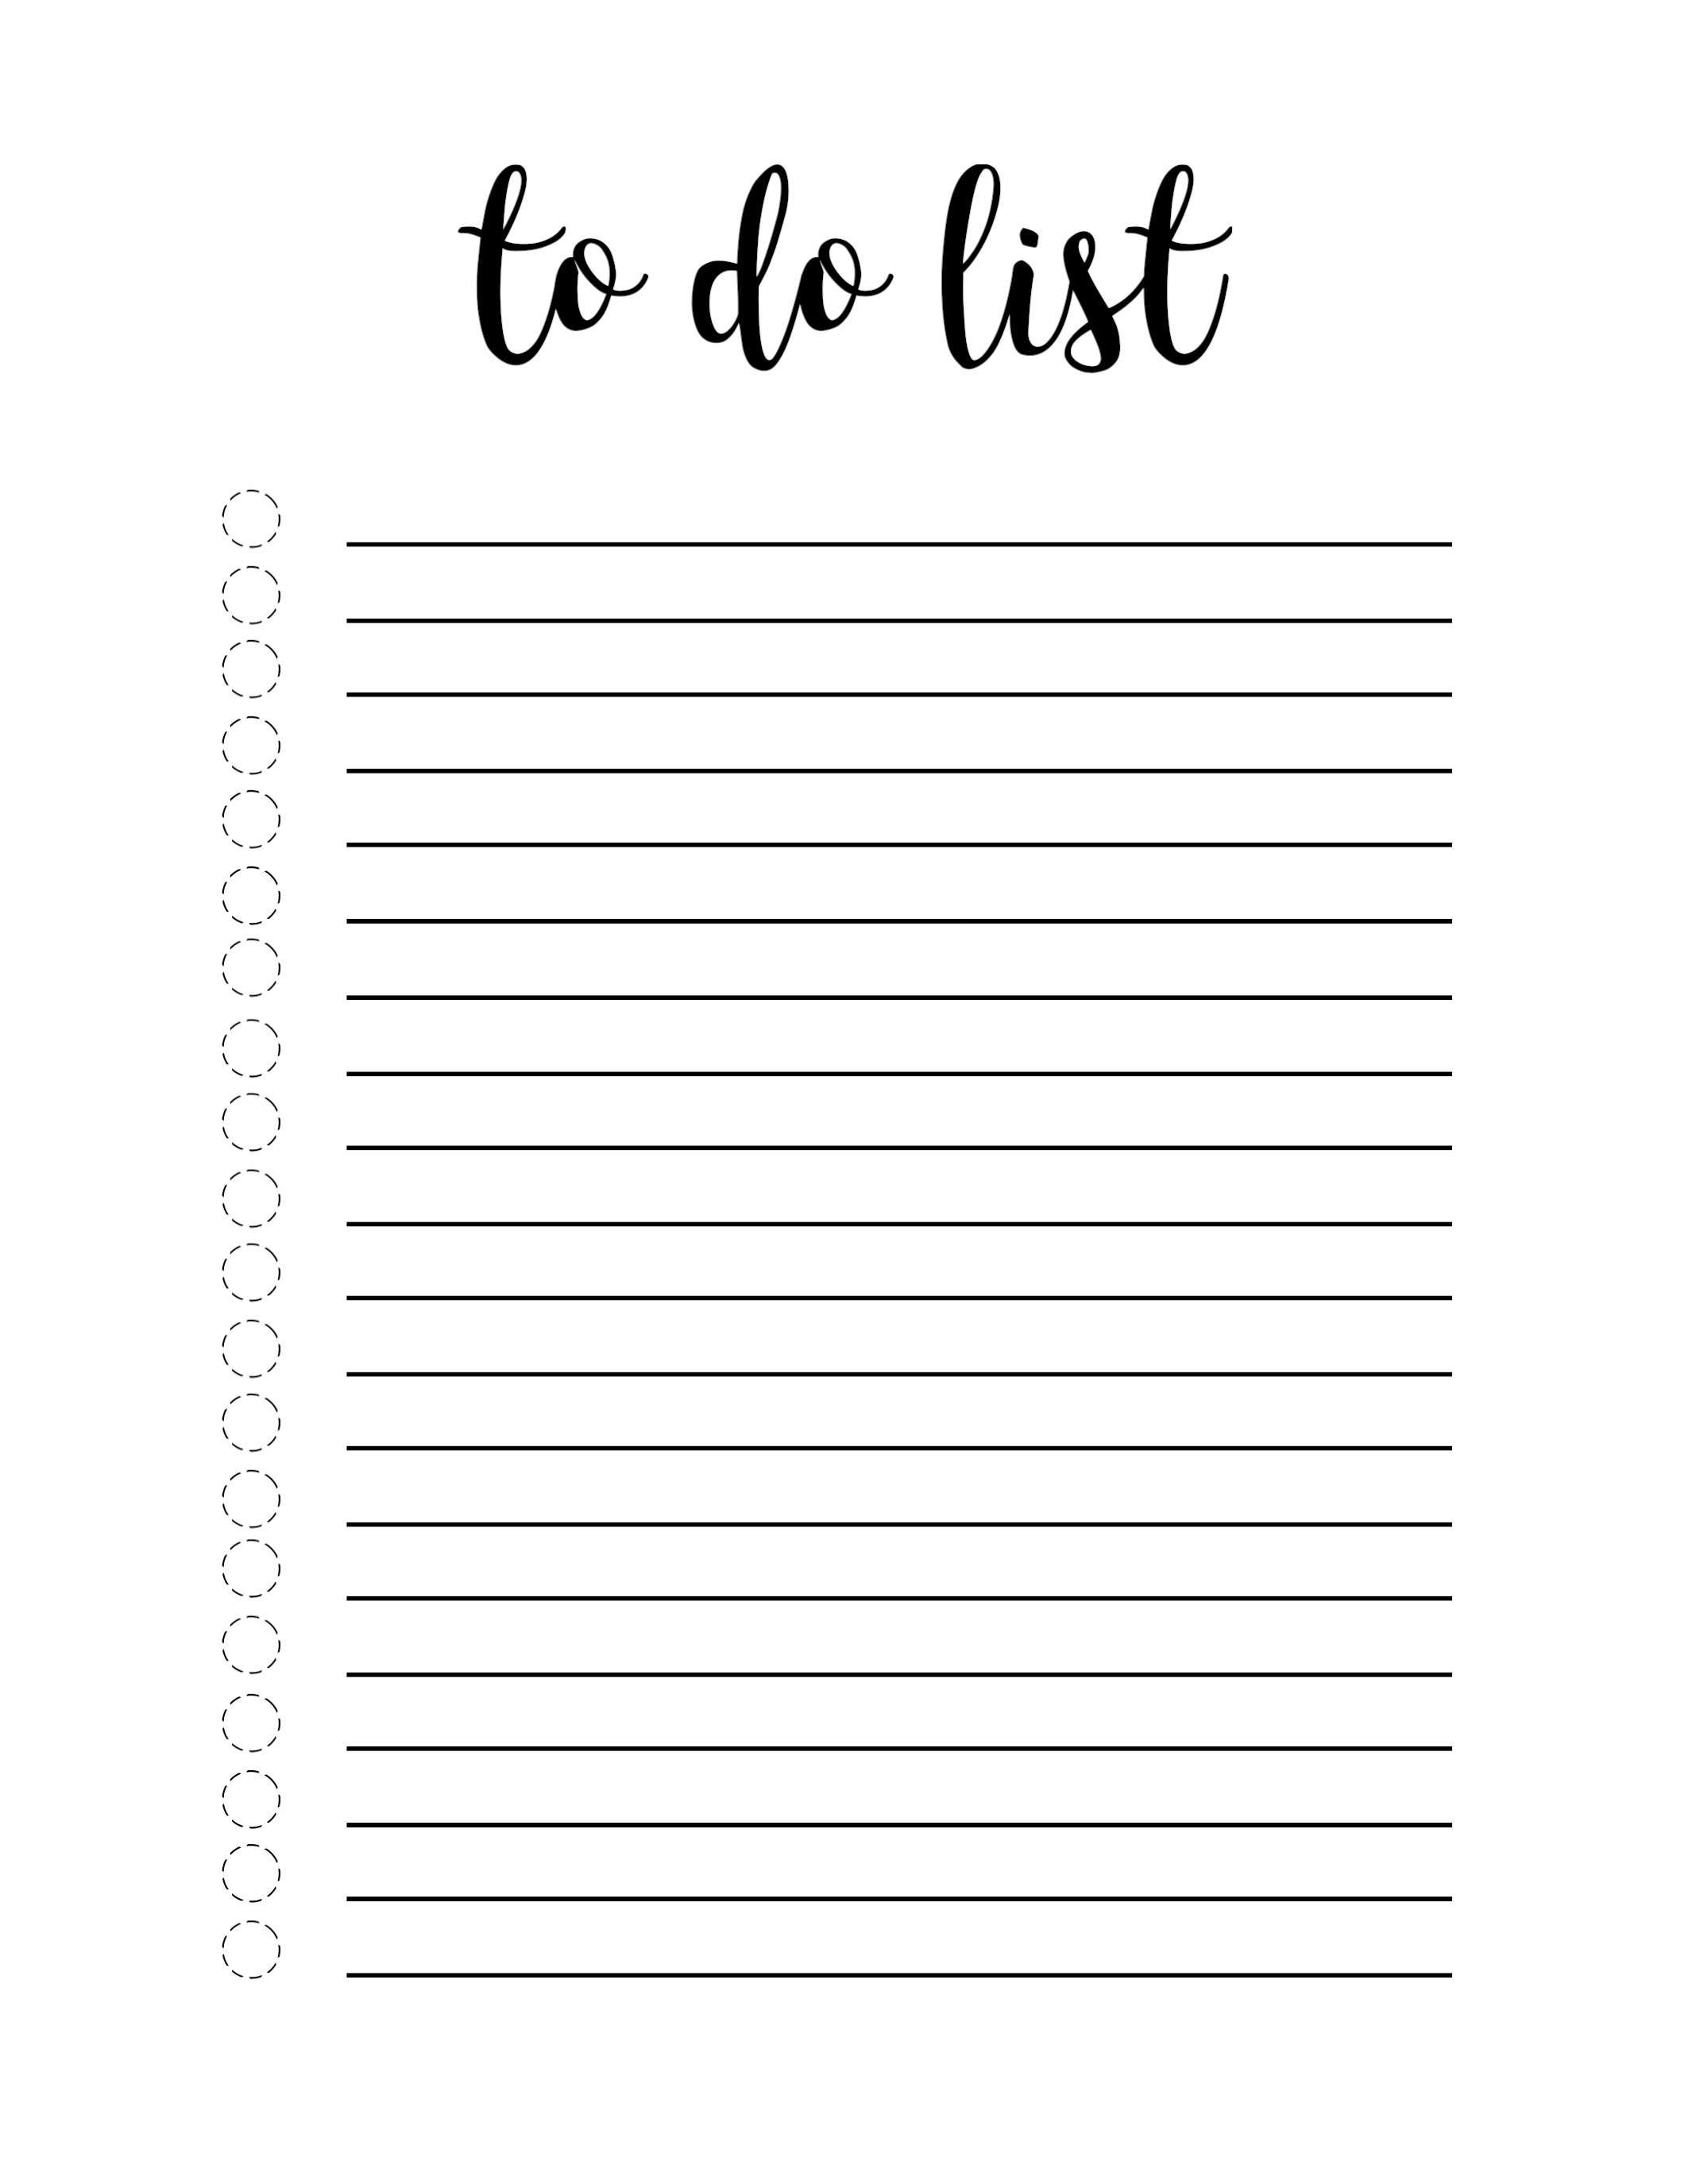 Free To Do List Templates in Excel